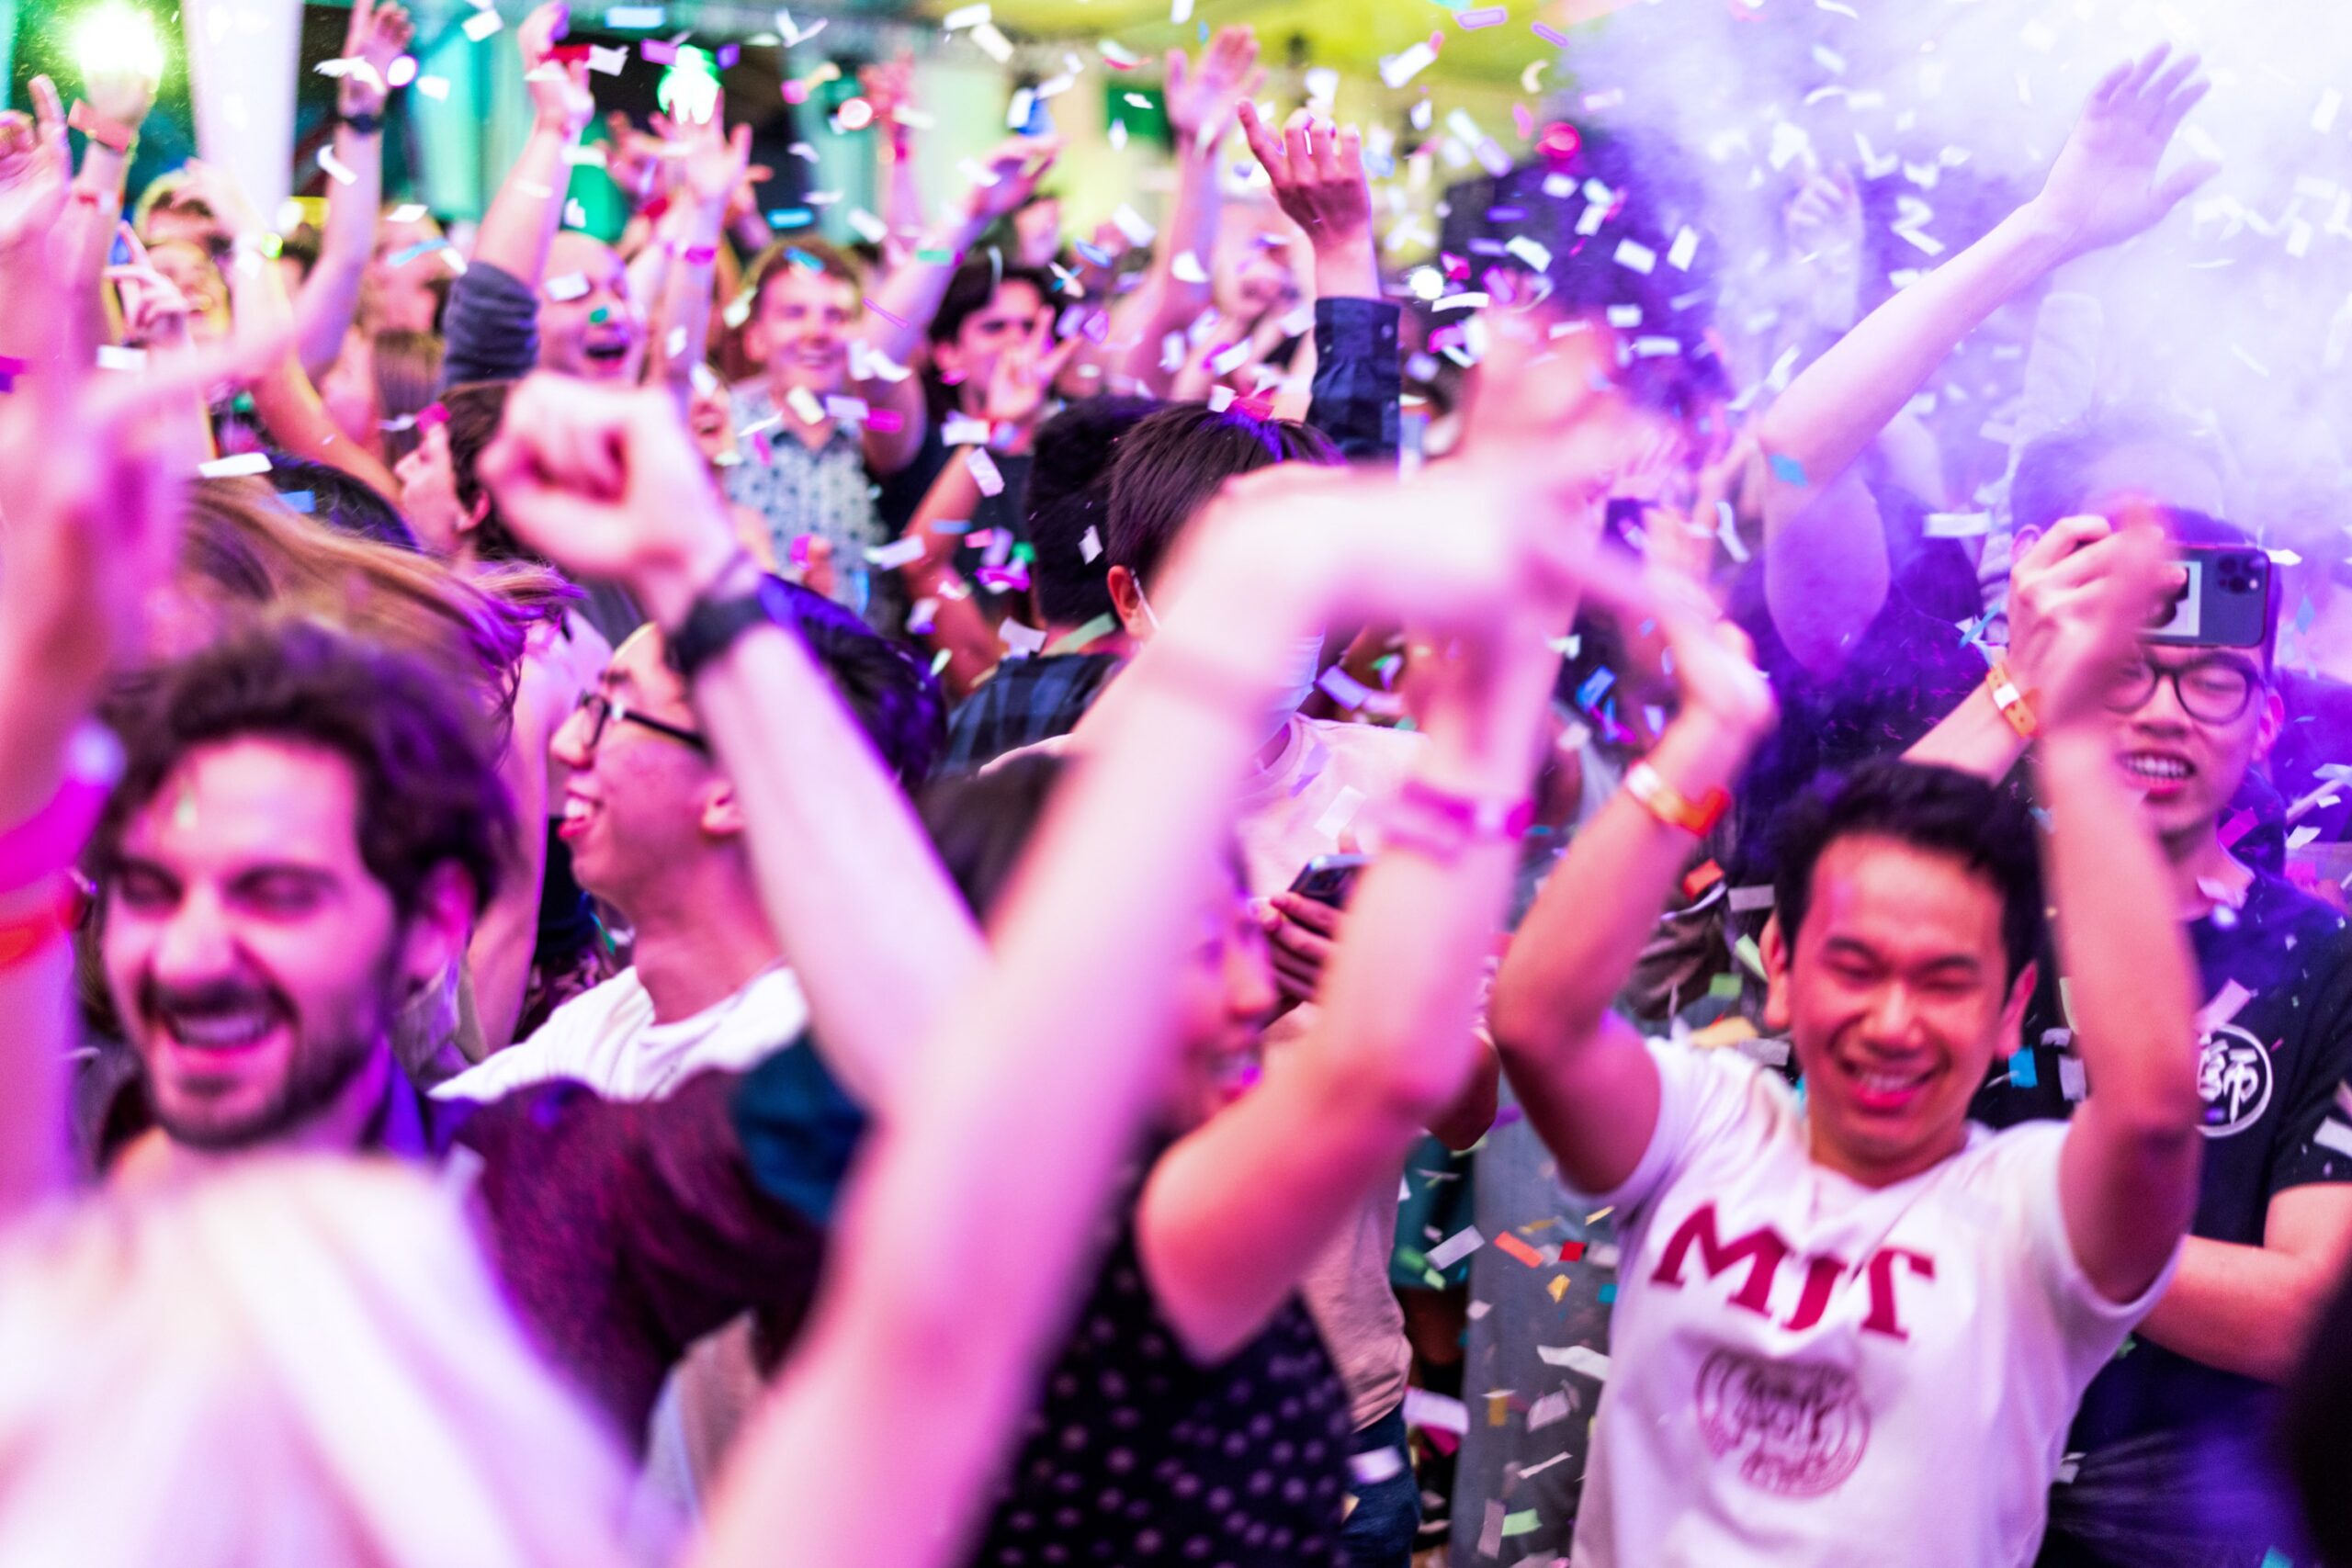 partygoers with confetti and colored lights